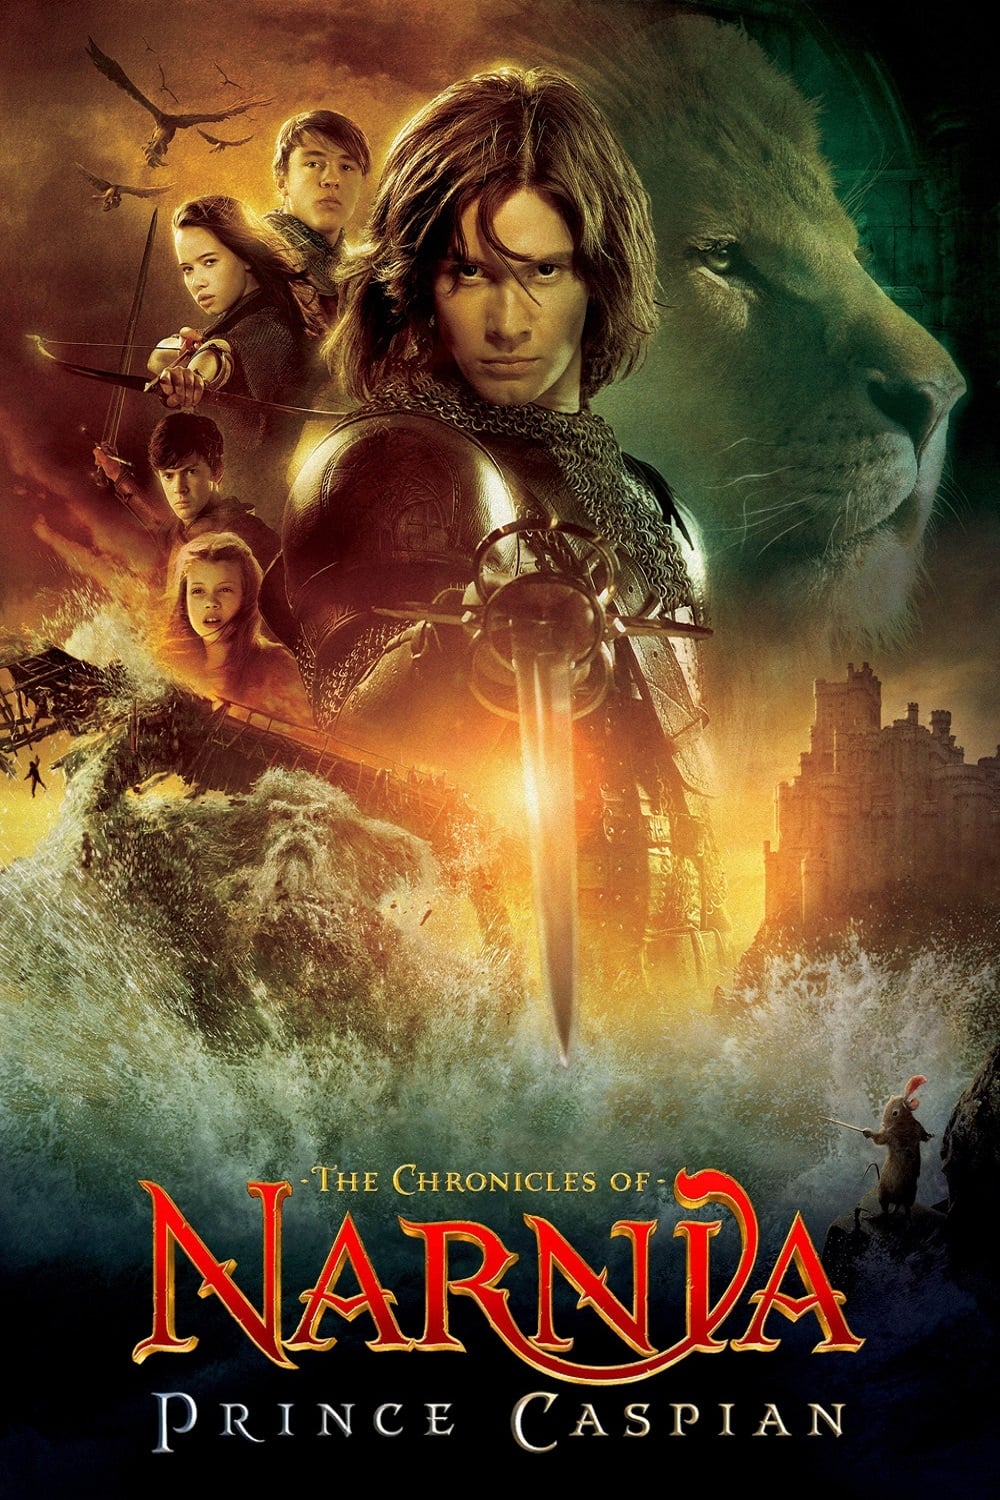 The Chronicles of Narnia: Prince Caspian (2008) Download